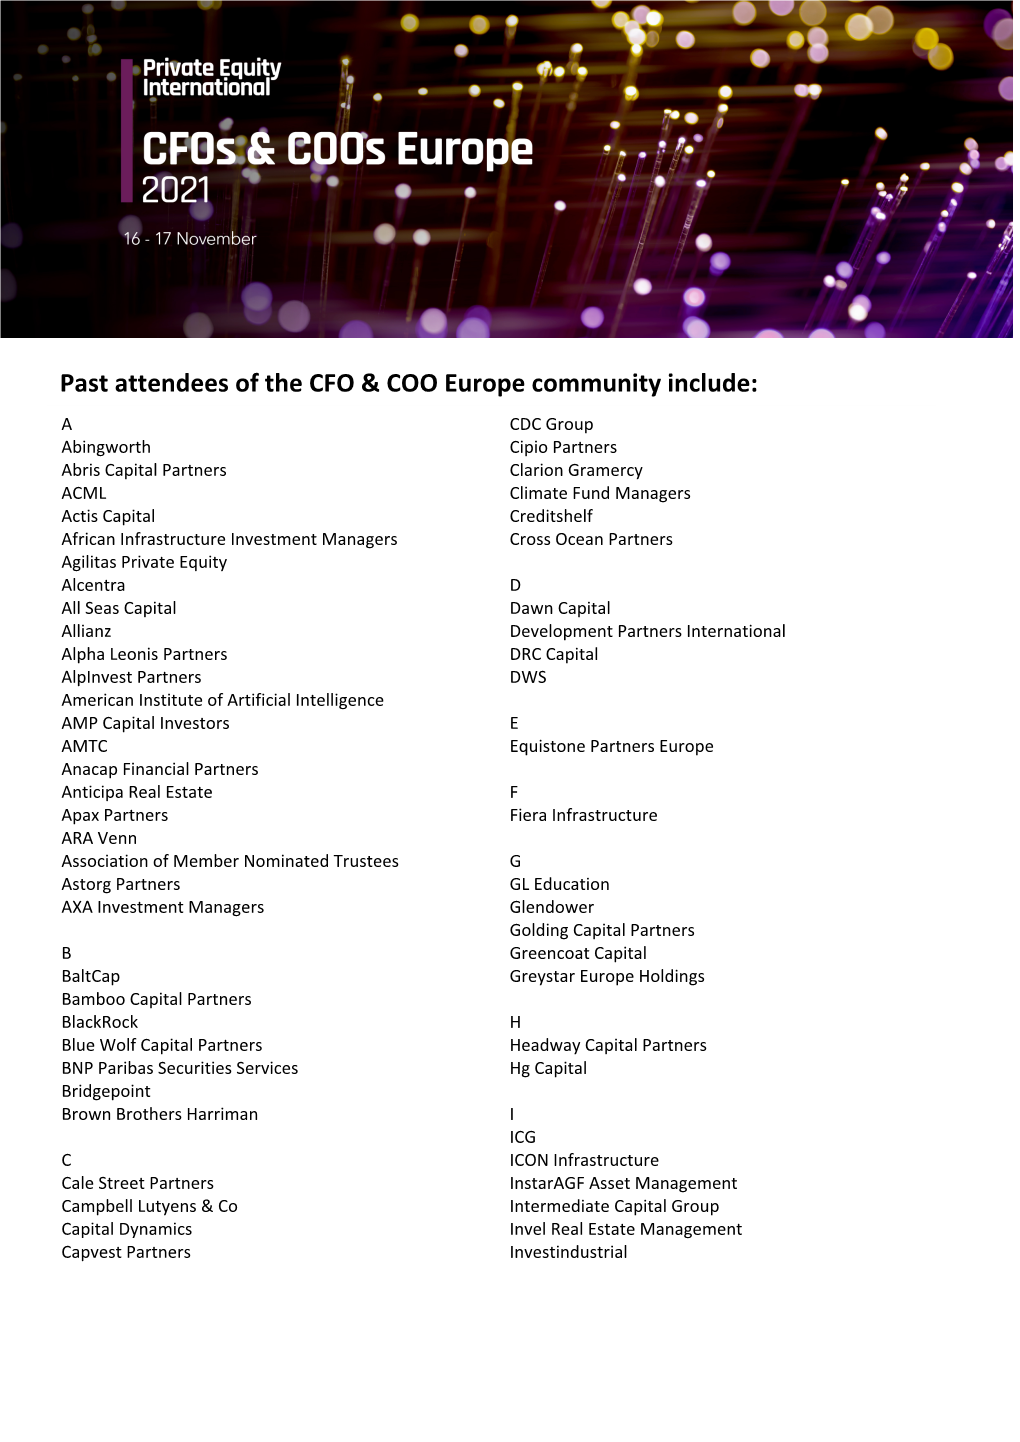 Past Attendees of the CFO & COO Europe Community Include